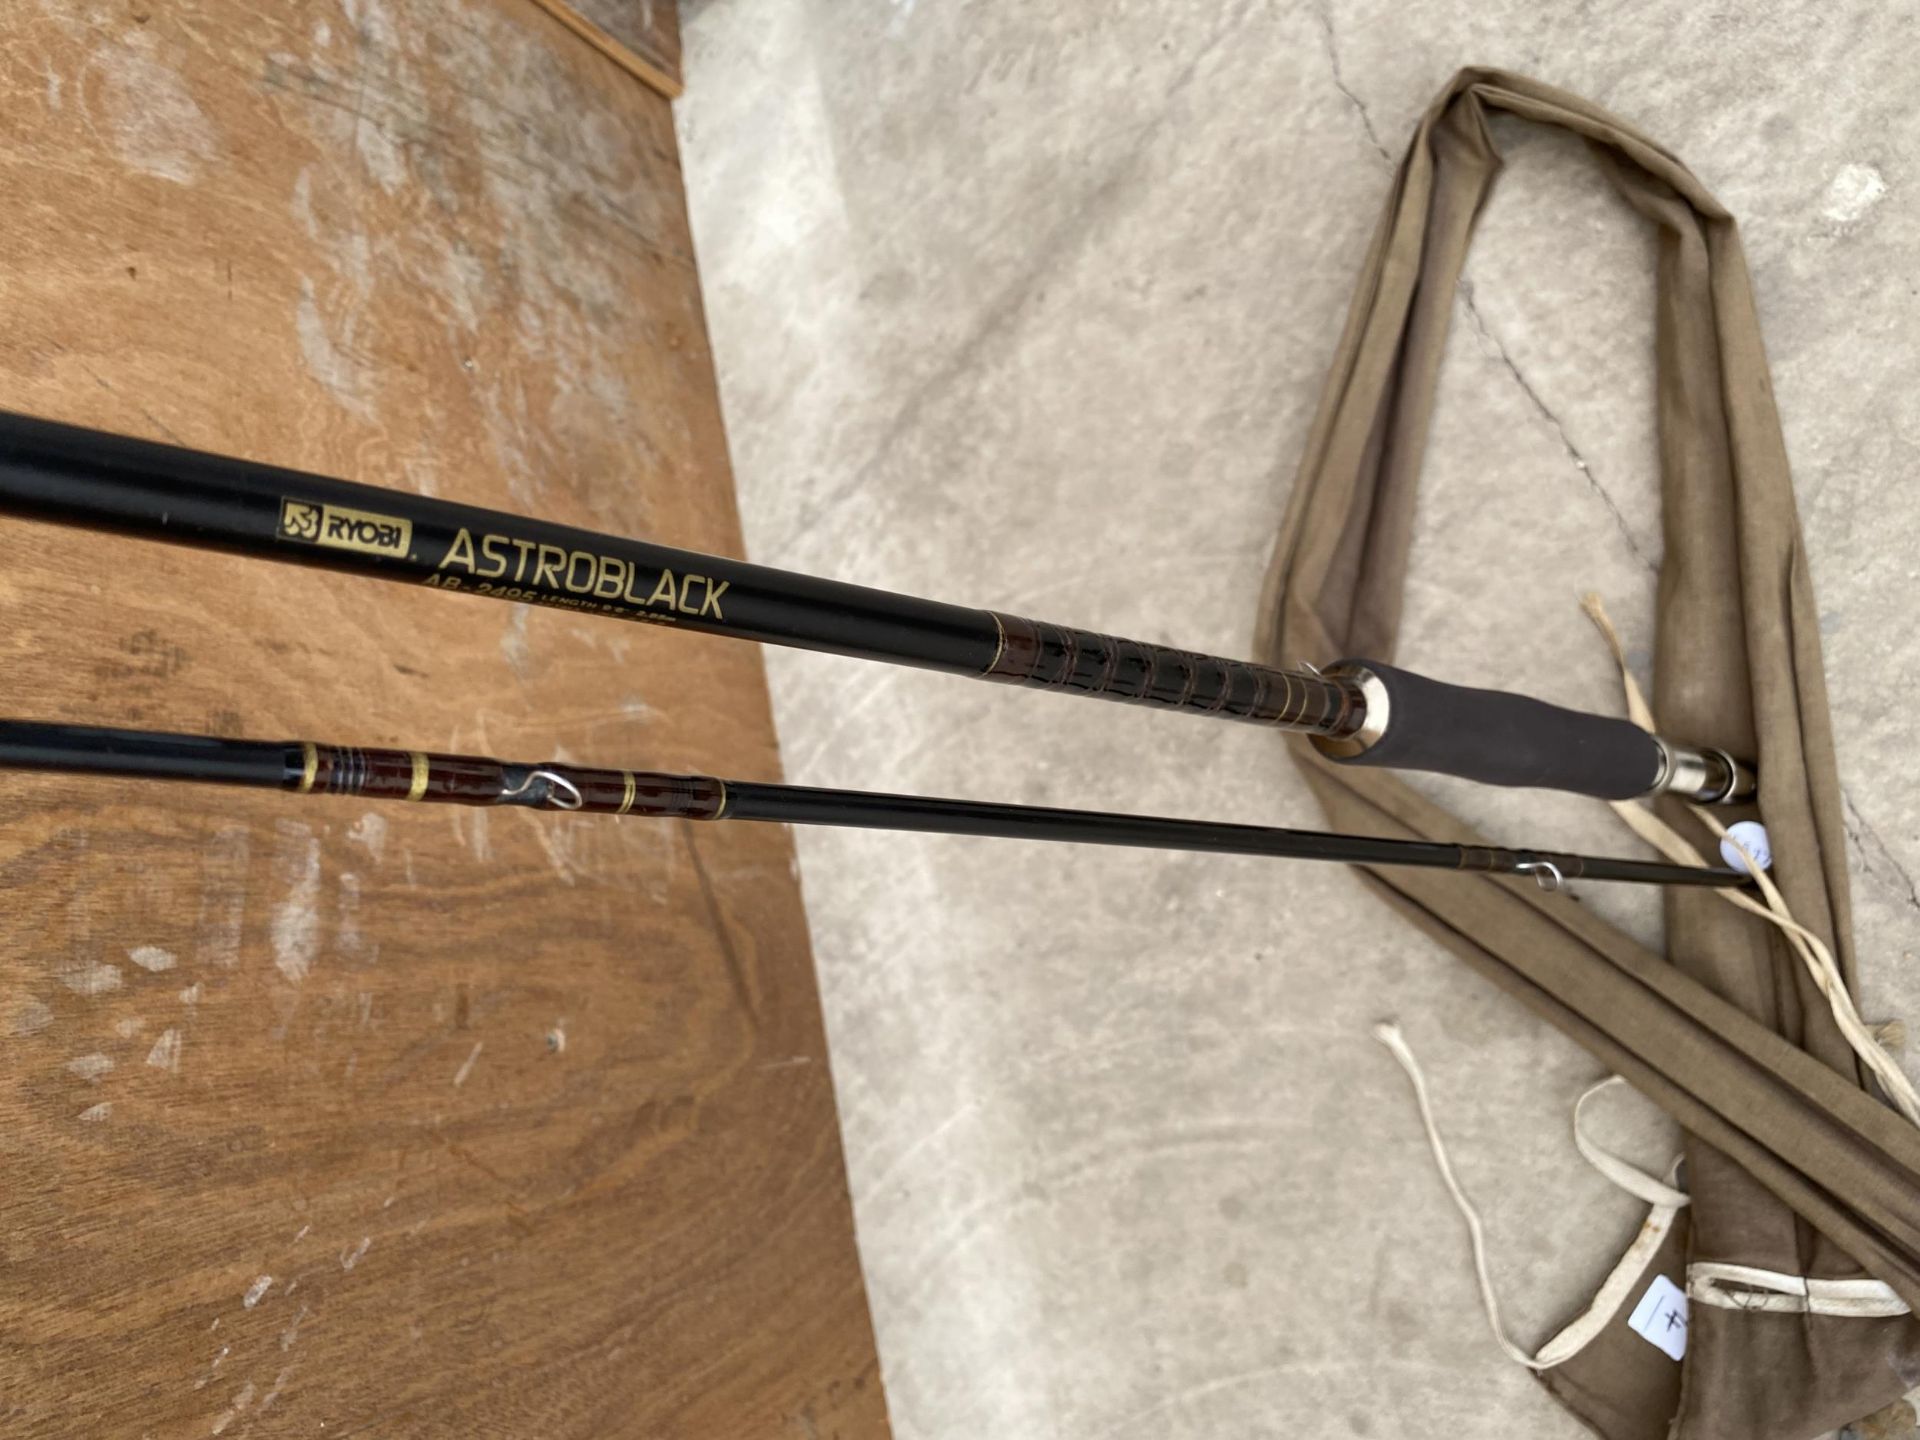 TWO FLY FISHING RODS CONSISTING OF AN ASTROBLACK 9'6" 8-9# AND A SHAKESPERE SIGMA GRAPHITE 8'10" 6- - Image 2 of 9